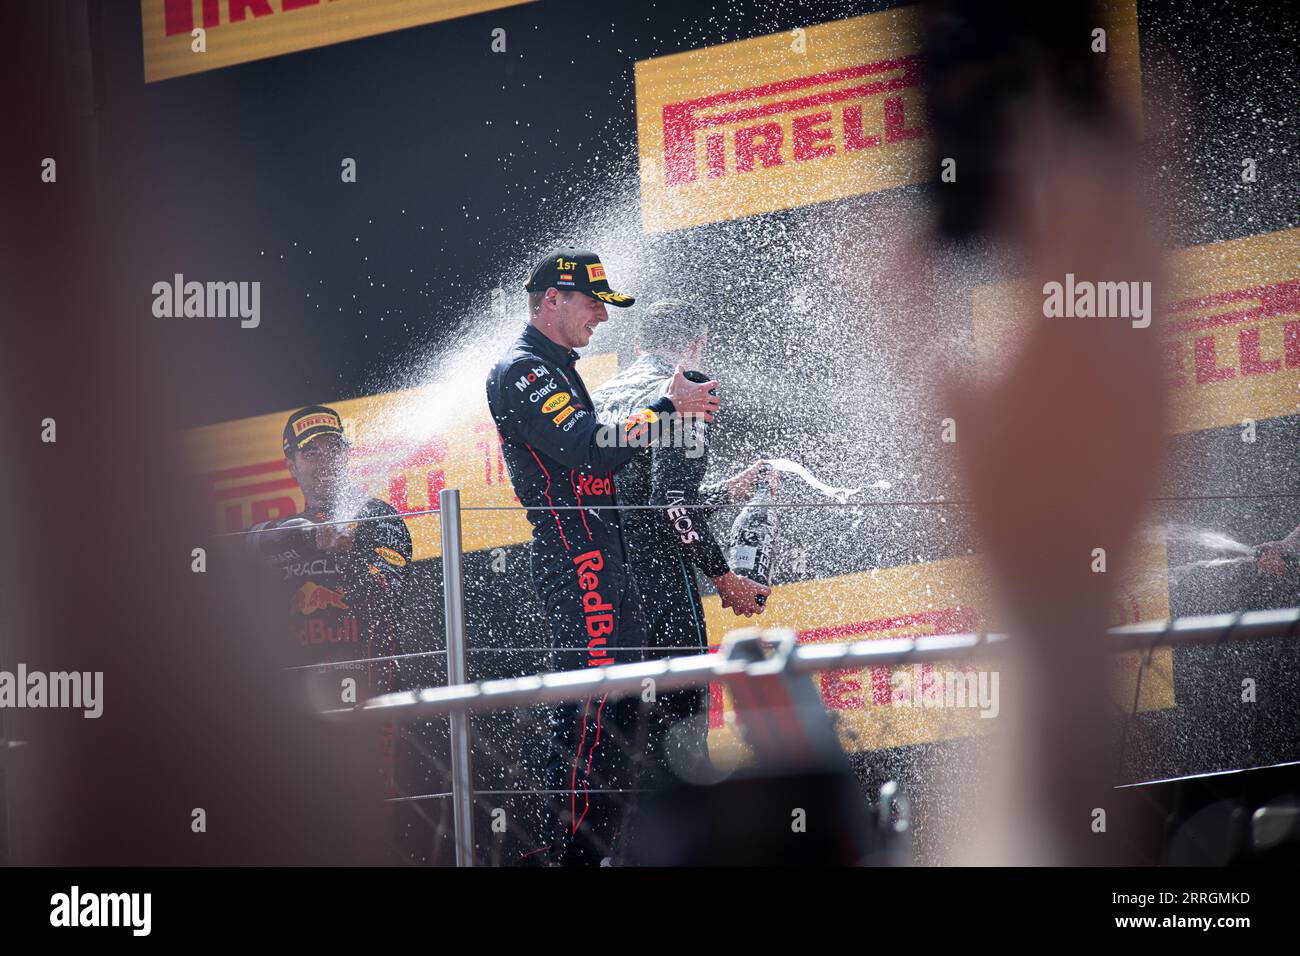 George Russell, Max Verstappen, and Sergio Perez in jubilant celebration, spraying champagne after their victories at the Spanish Grand Prix. Stock Photo